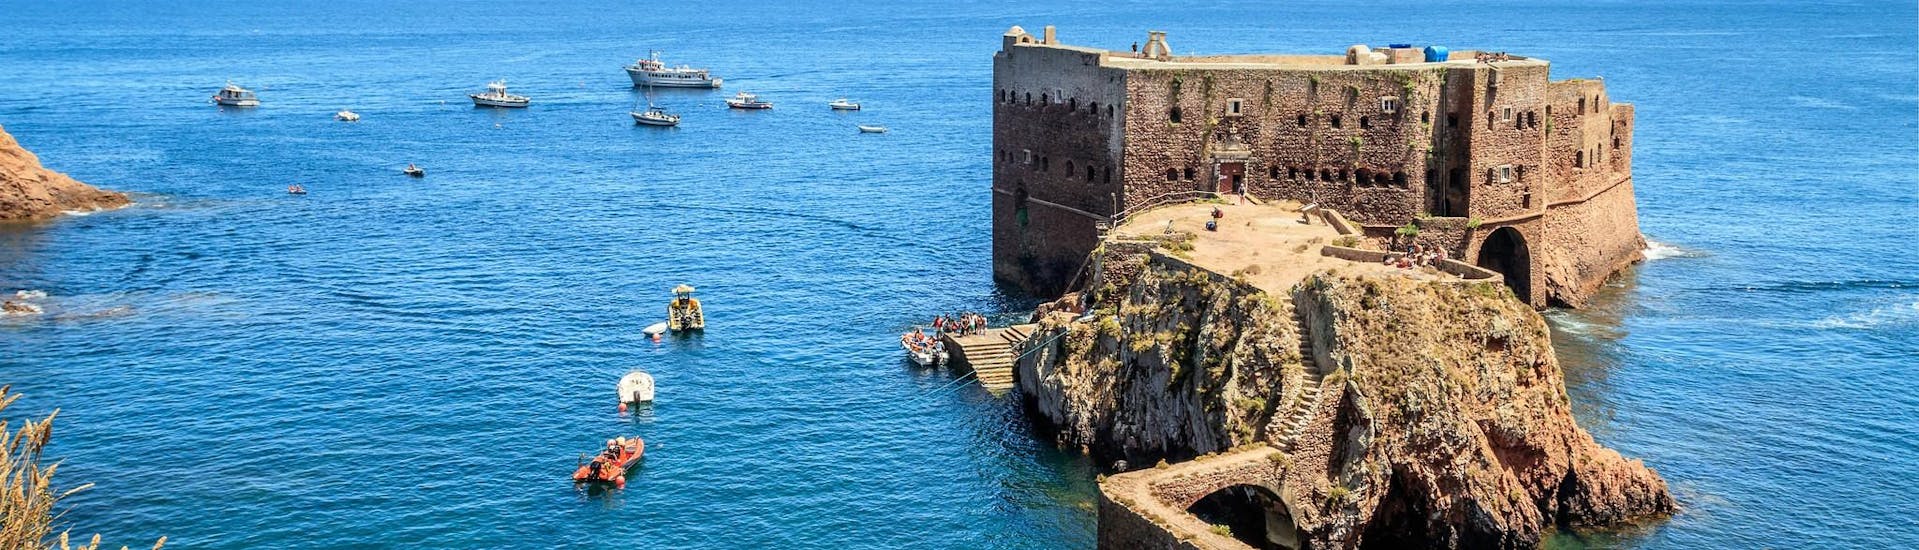 View from Berlenga Island to Fort São João Baptista of Berlengas, a popular destinations for boat trips to the Berlenga Islands.